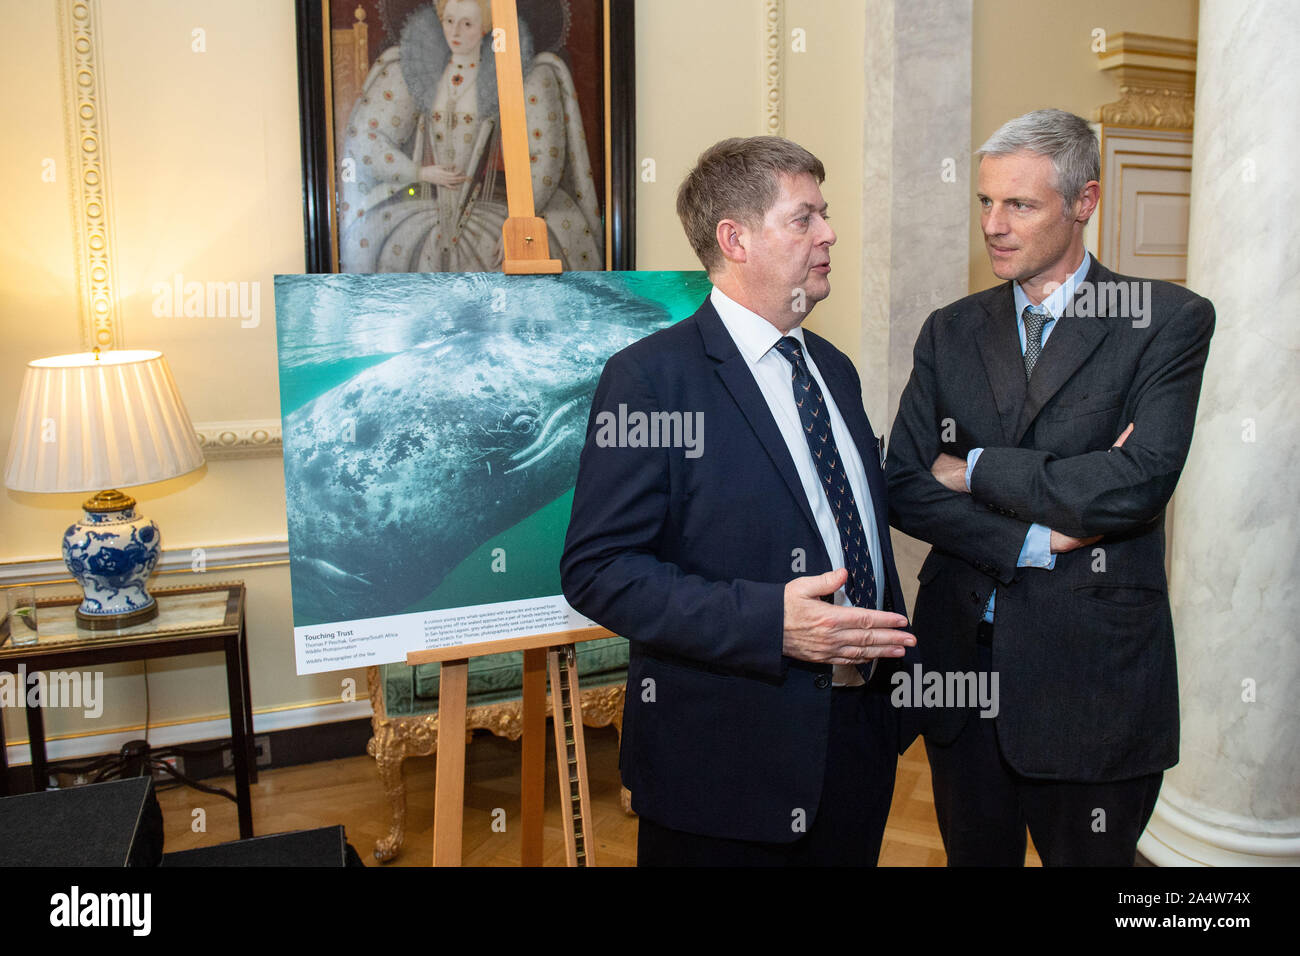 Natural History Museum Director Sir Michael Dixon (left) and Minister at the Department for Environment, Food and Rural Affairs Zac Goldsmith (right) speaks at a reception previewing images from the Natural History Museum's 55th Wildlife Photographer of the Year competition at Downing Street, London. PA Photo. Picture date: Wednesday October 16, 2019. See PA story ENVIRONMENT Photography. Photo credit should read: Dominic Lipinski/PA Wire Stock Photo